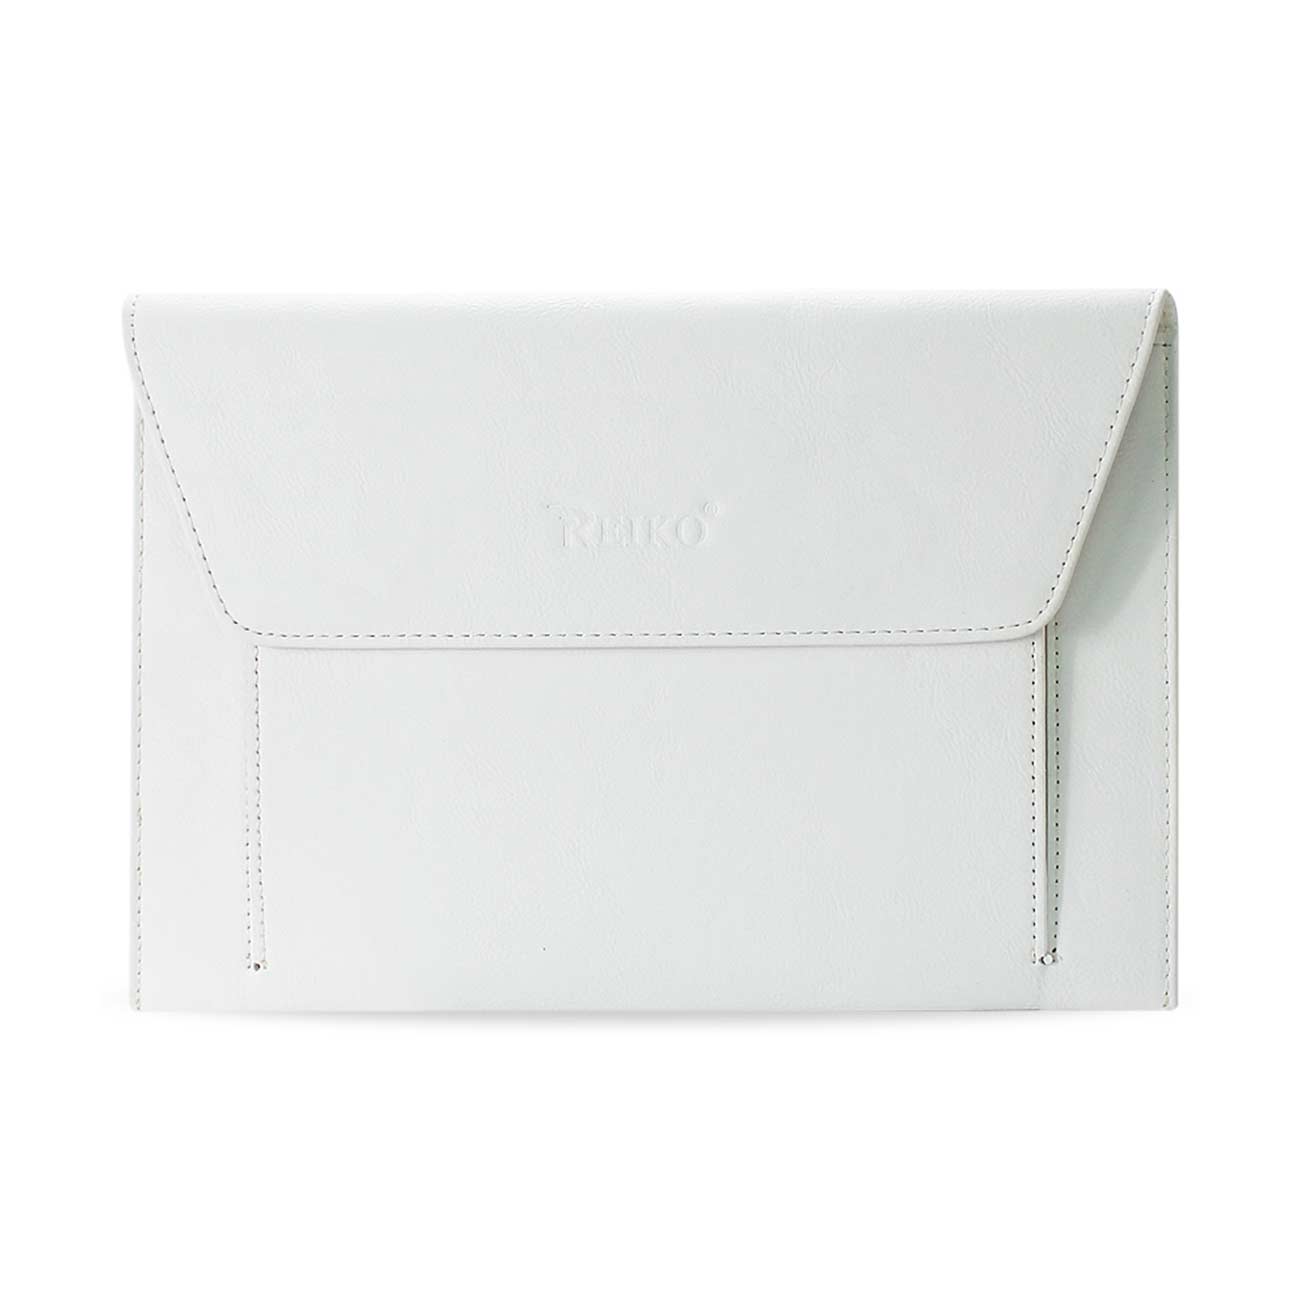 REIKO PREMIUM LEATHER CASE POUCH FOR 7INCHES IPADS AND TABLETS In WHITE